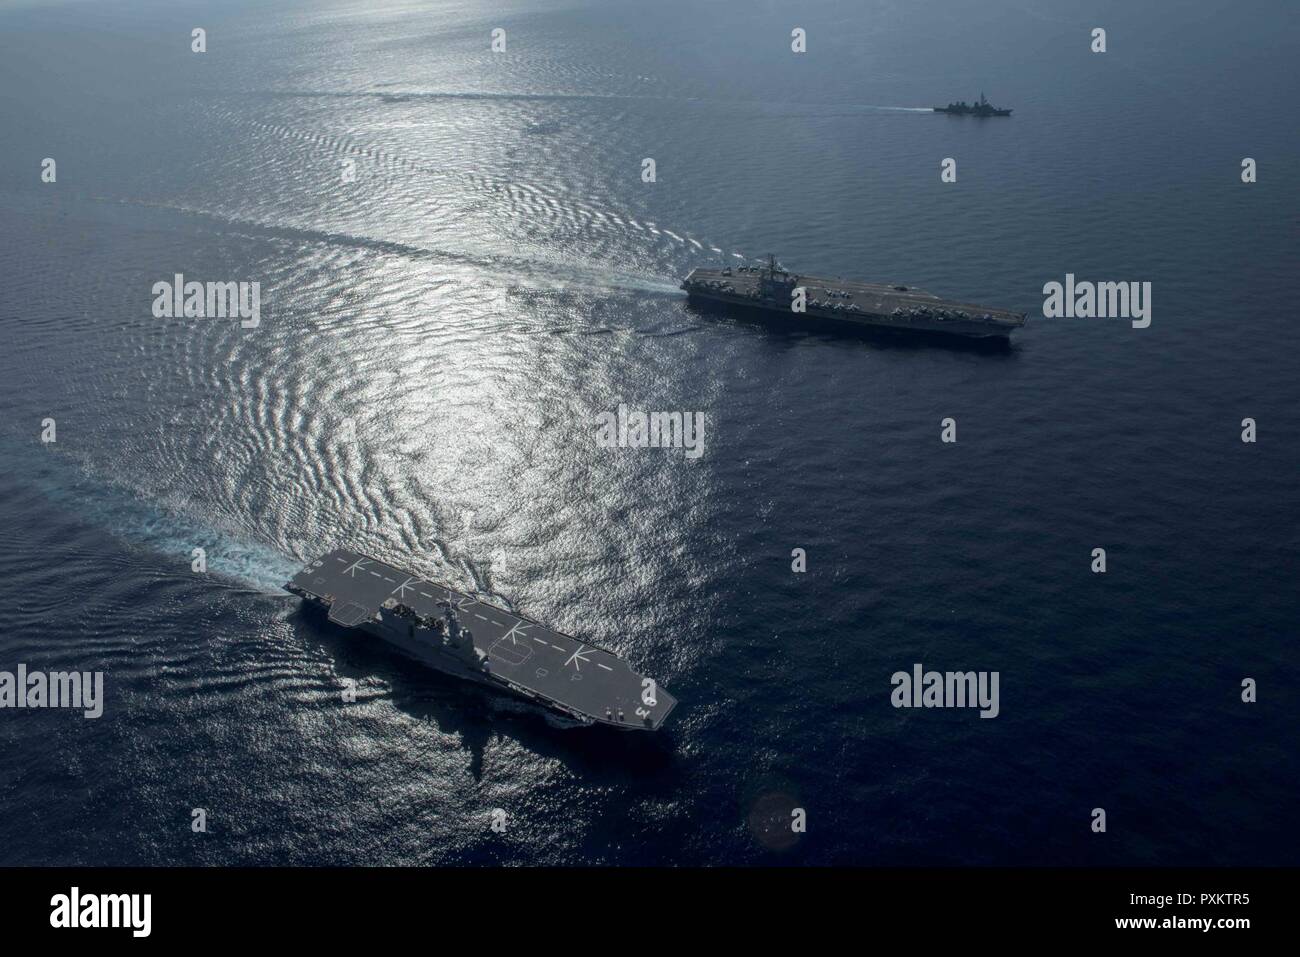 9 SOUTH CHINA SEA (June 15, 2017) The Nimitz-class aircraft carrier, USS Ronald Reagan (CVN 76), Izumo-class helicopter destroyer, JS Izumo (DDH 183), and Takanami-class destroyer JS Sazanami (DDG 113), sail in formation during a combined Japan Maritime Self-Defense Force and U.S. Navy exercise June 13-15, 2017. Participants included USS Ronald Reagan, the Ticonderoga-class guided-missile cruiser USS Shiloh (CG 67), Carrier Air Wing 5, Destroyer Squadron 15, the Arleigh Burke-class guided-missile destroyers USS Barry (DDG 52) and USS McCampbell (DDG 85), JS Izumo and JS Sazanami. The Japan Mar Stock Photo